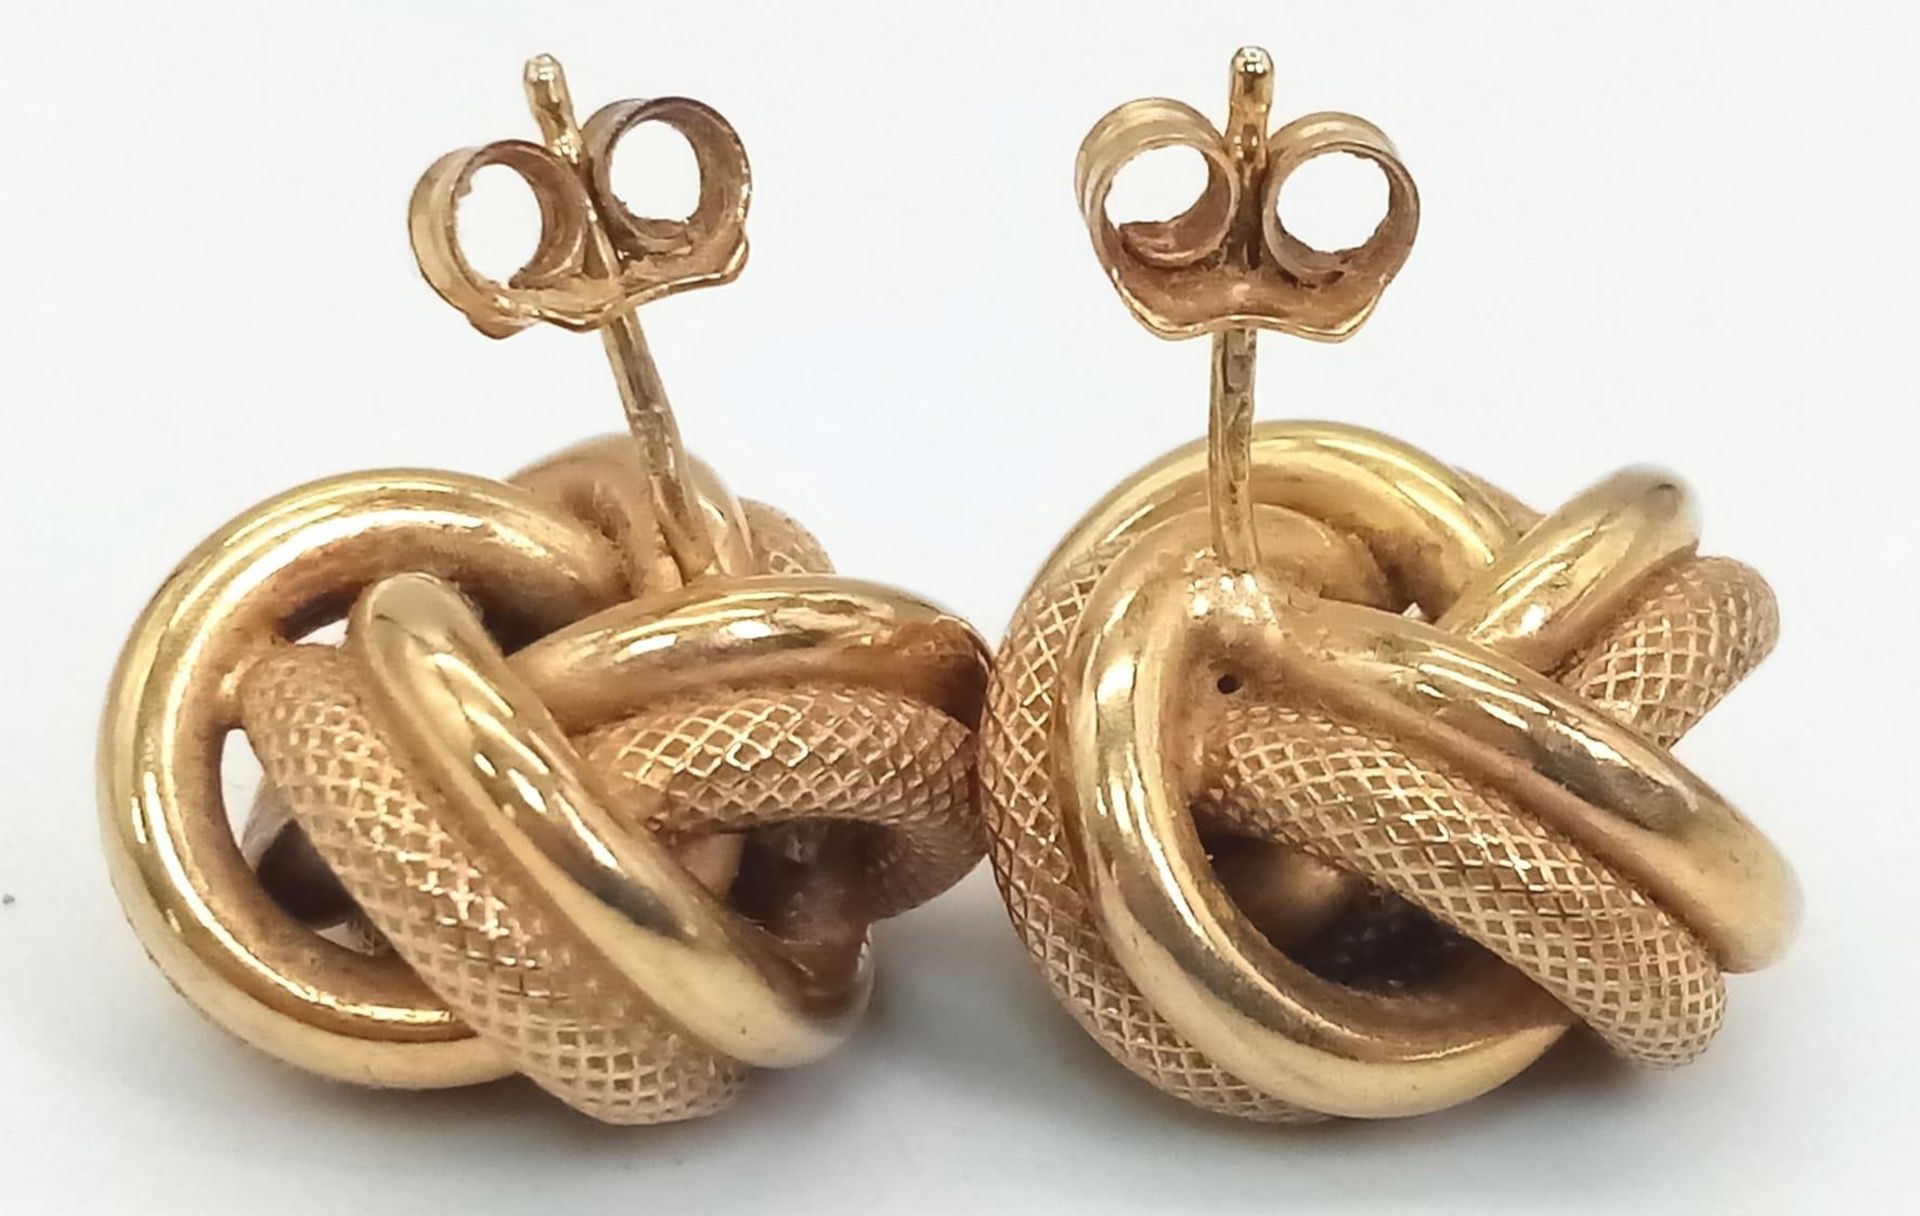 A Pair of 9K Yellow Gold Knot Earrings. Smooth and geometric patterns entwined. 4.95g total weight. - Image 2 of 3